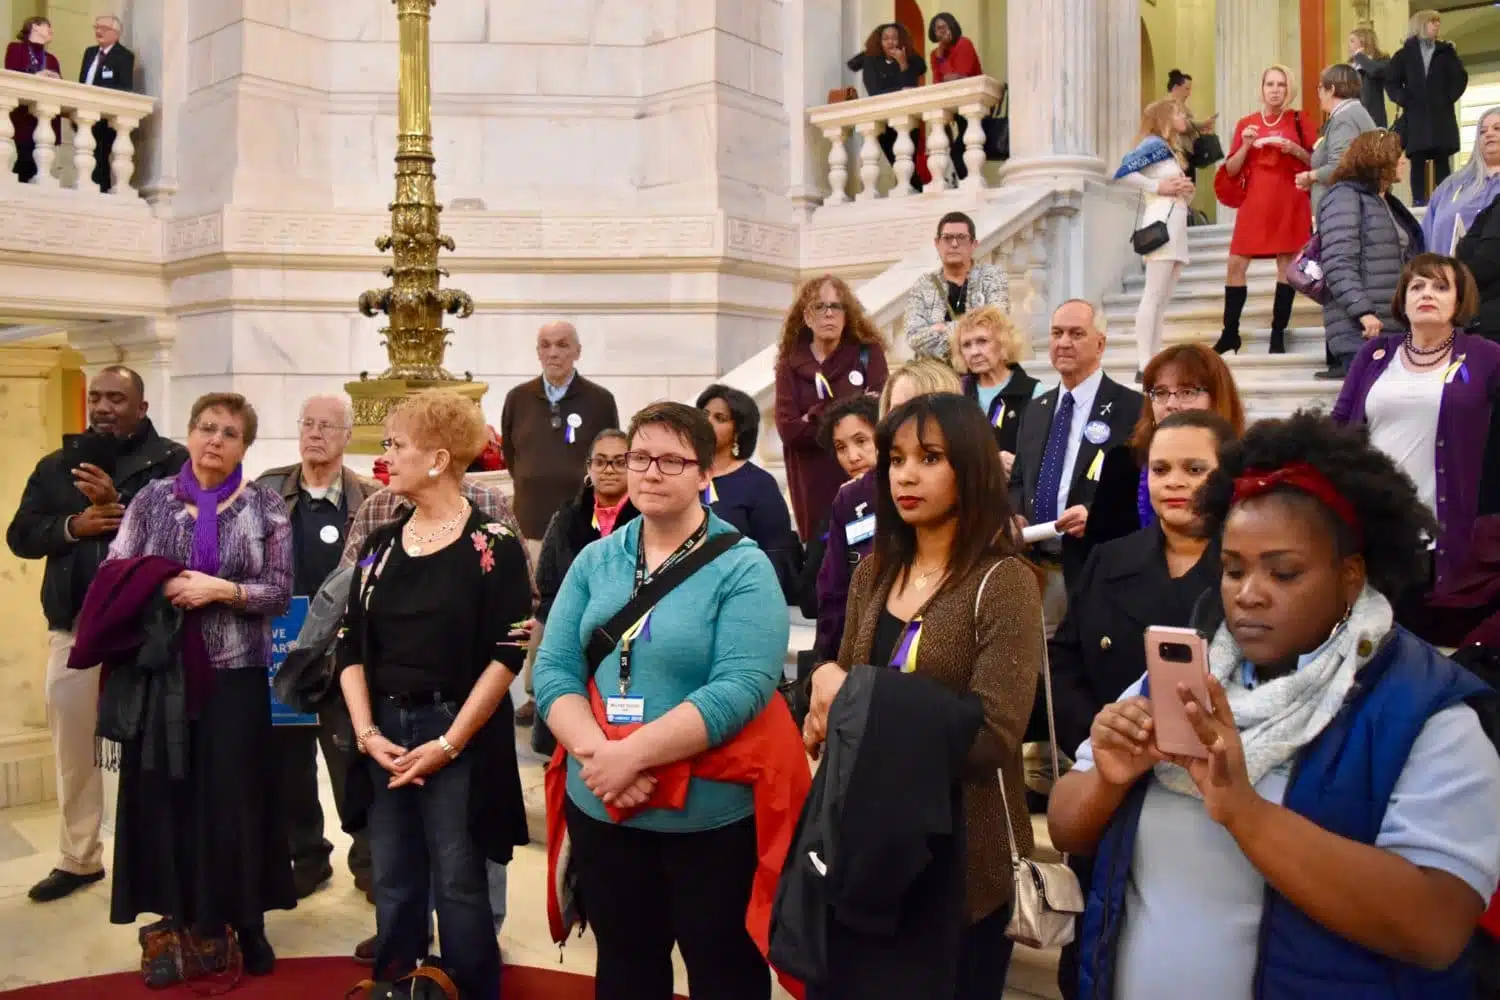 International Women’s Day marked by two celebrations at the State House